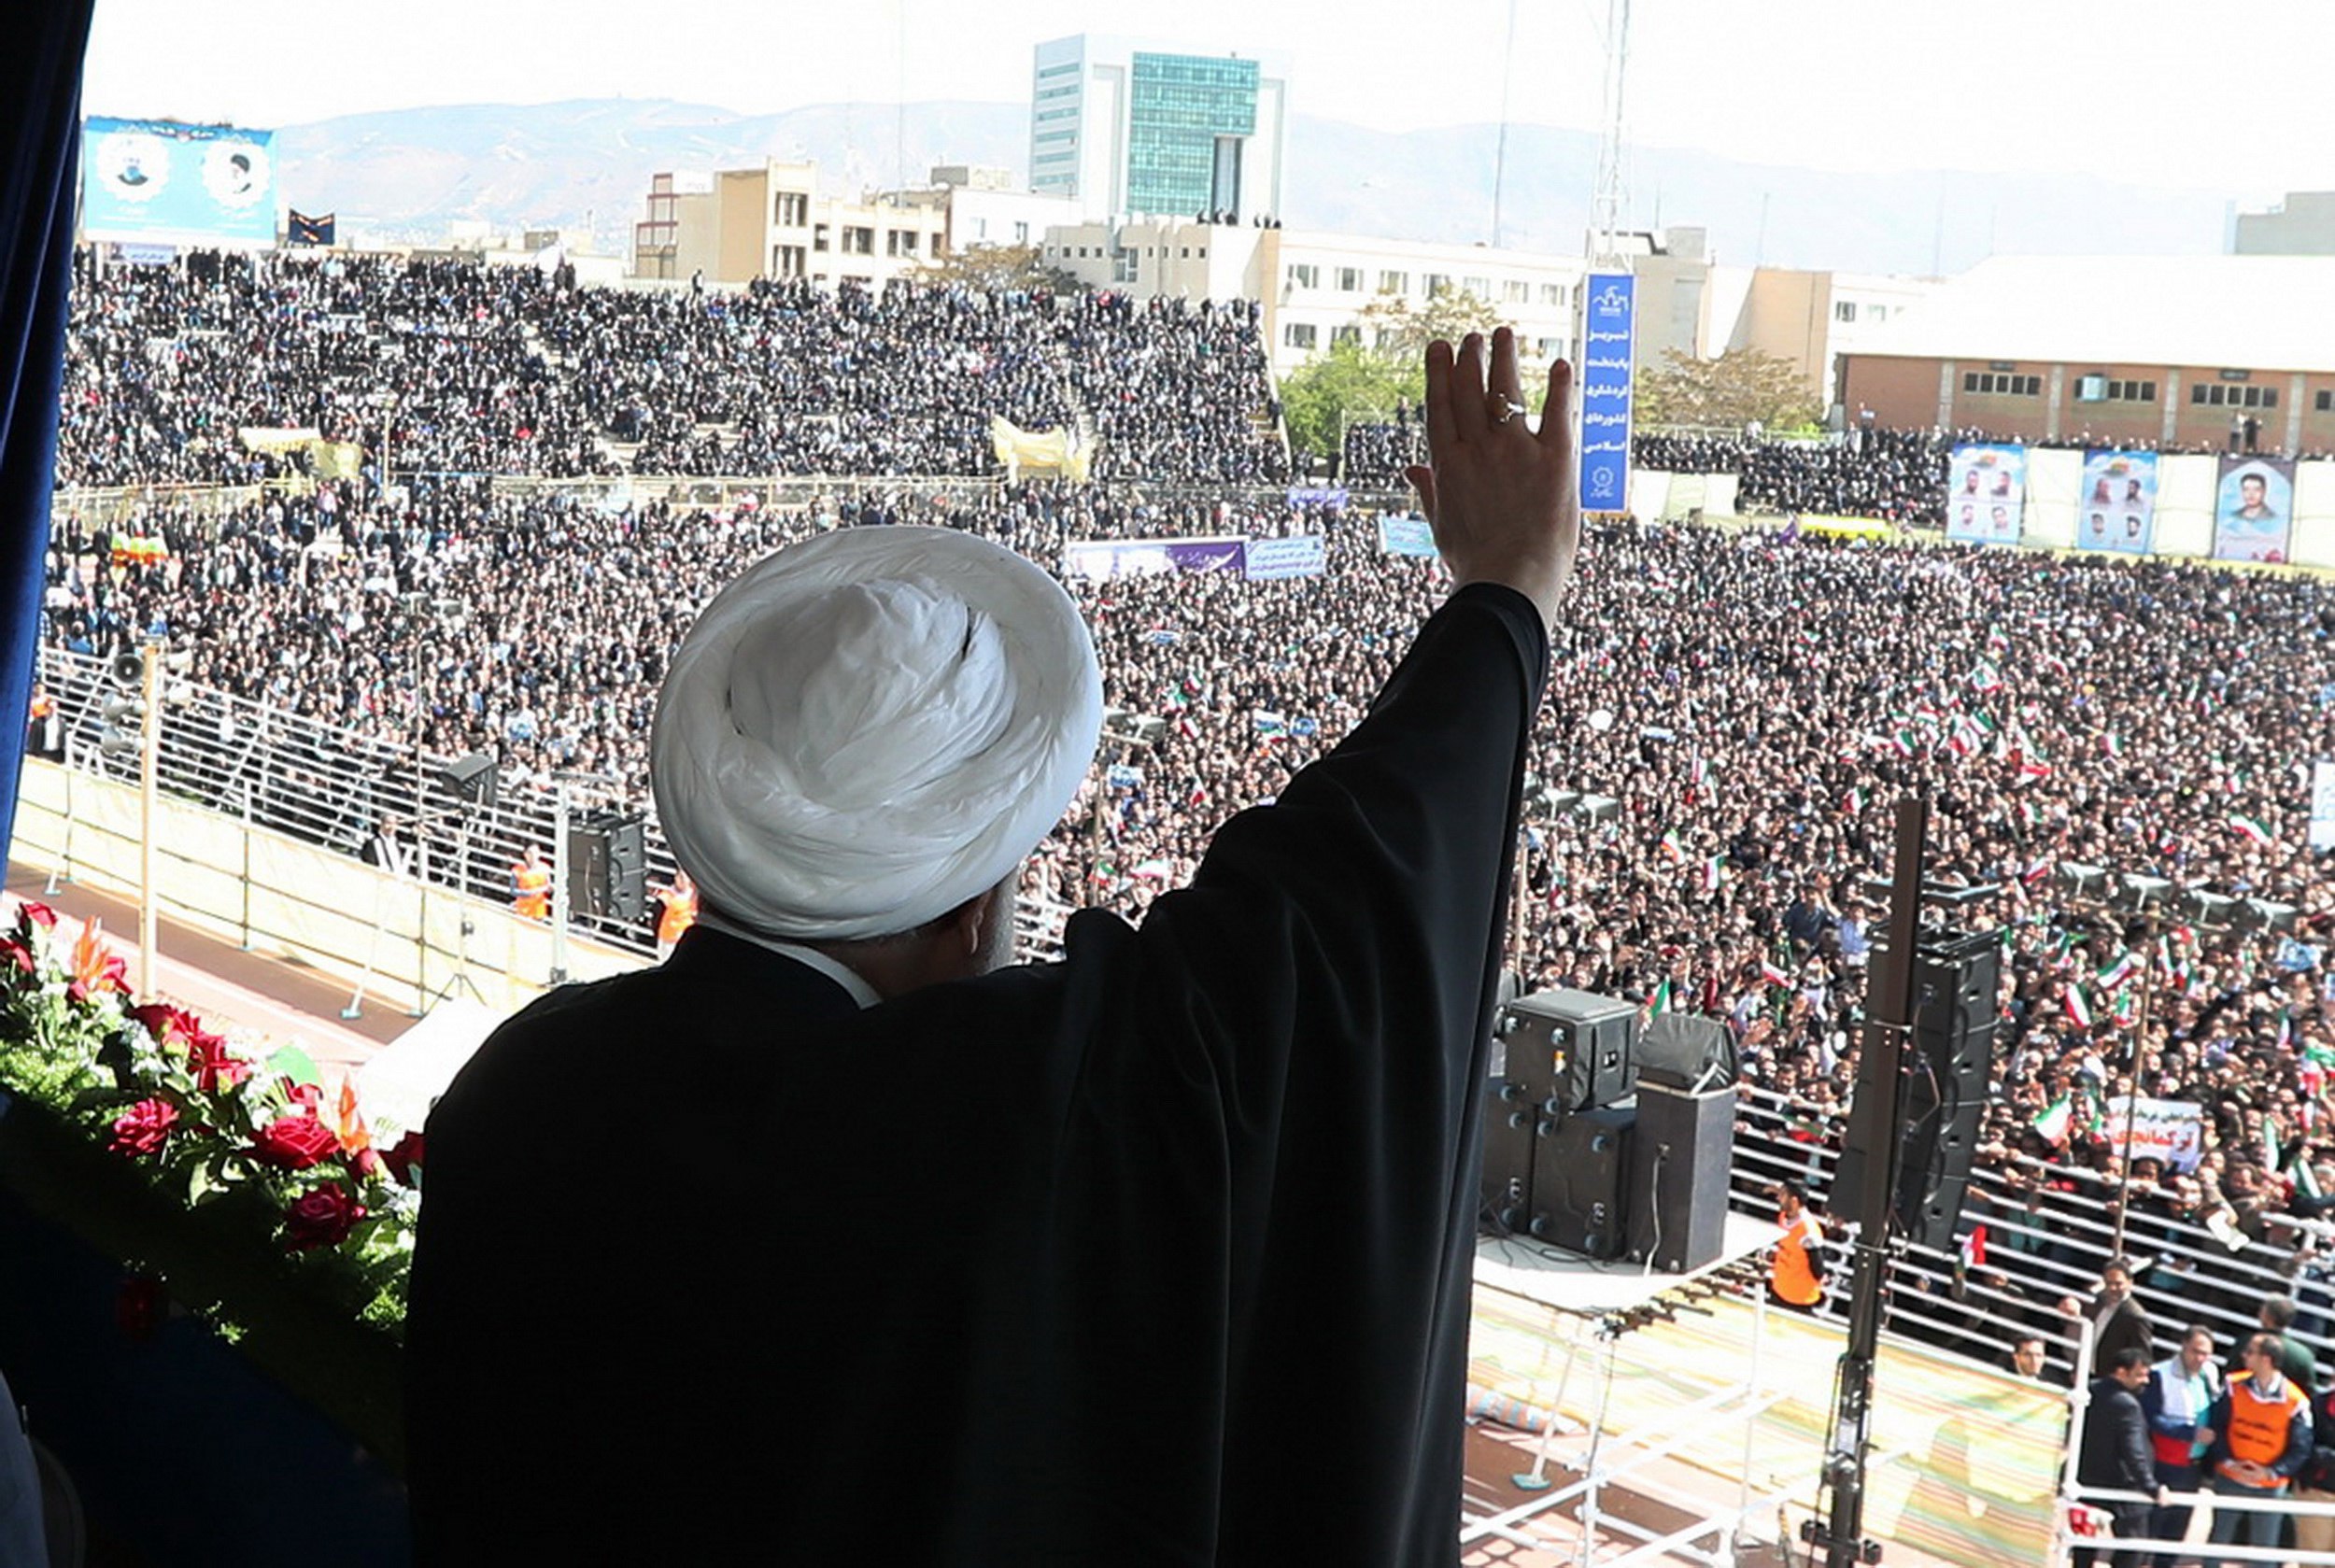 epa06689163 A handout photo made available by the presidential official website shows Iranian President Hassan Rouhani greeting the crowds in the City of Tabriz, northwestern, Iran, 24 April 2018. According to reports, Rouhani on 24 April warned his United States counterpart that abandoning a nuclear deal that the Tehran government signed with world powers in 2015 would lead to serious consequences. French President Emmanuel Macron was in Washington and is set to try and persuade US President Donald Trump not to walk away from the accord.  EPA/PRESIDENTIAL OFFICE HANDOUT  HANDOUT EDITORIAL USE ONLY/NO SALES